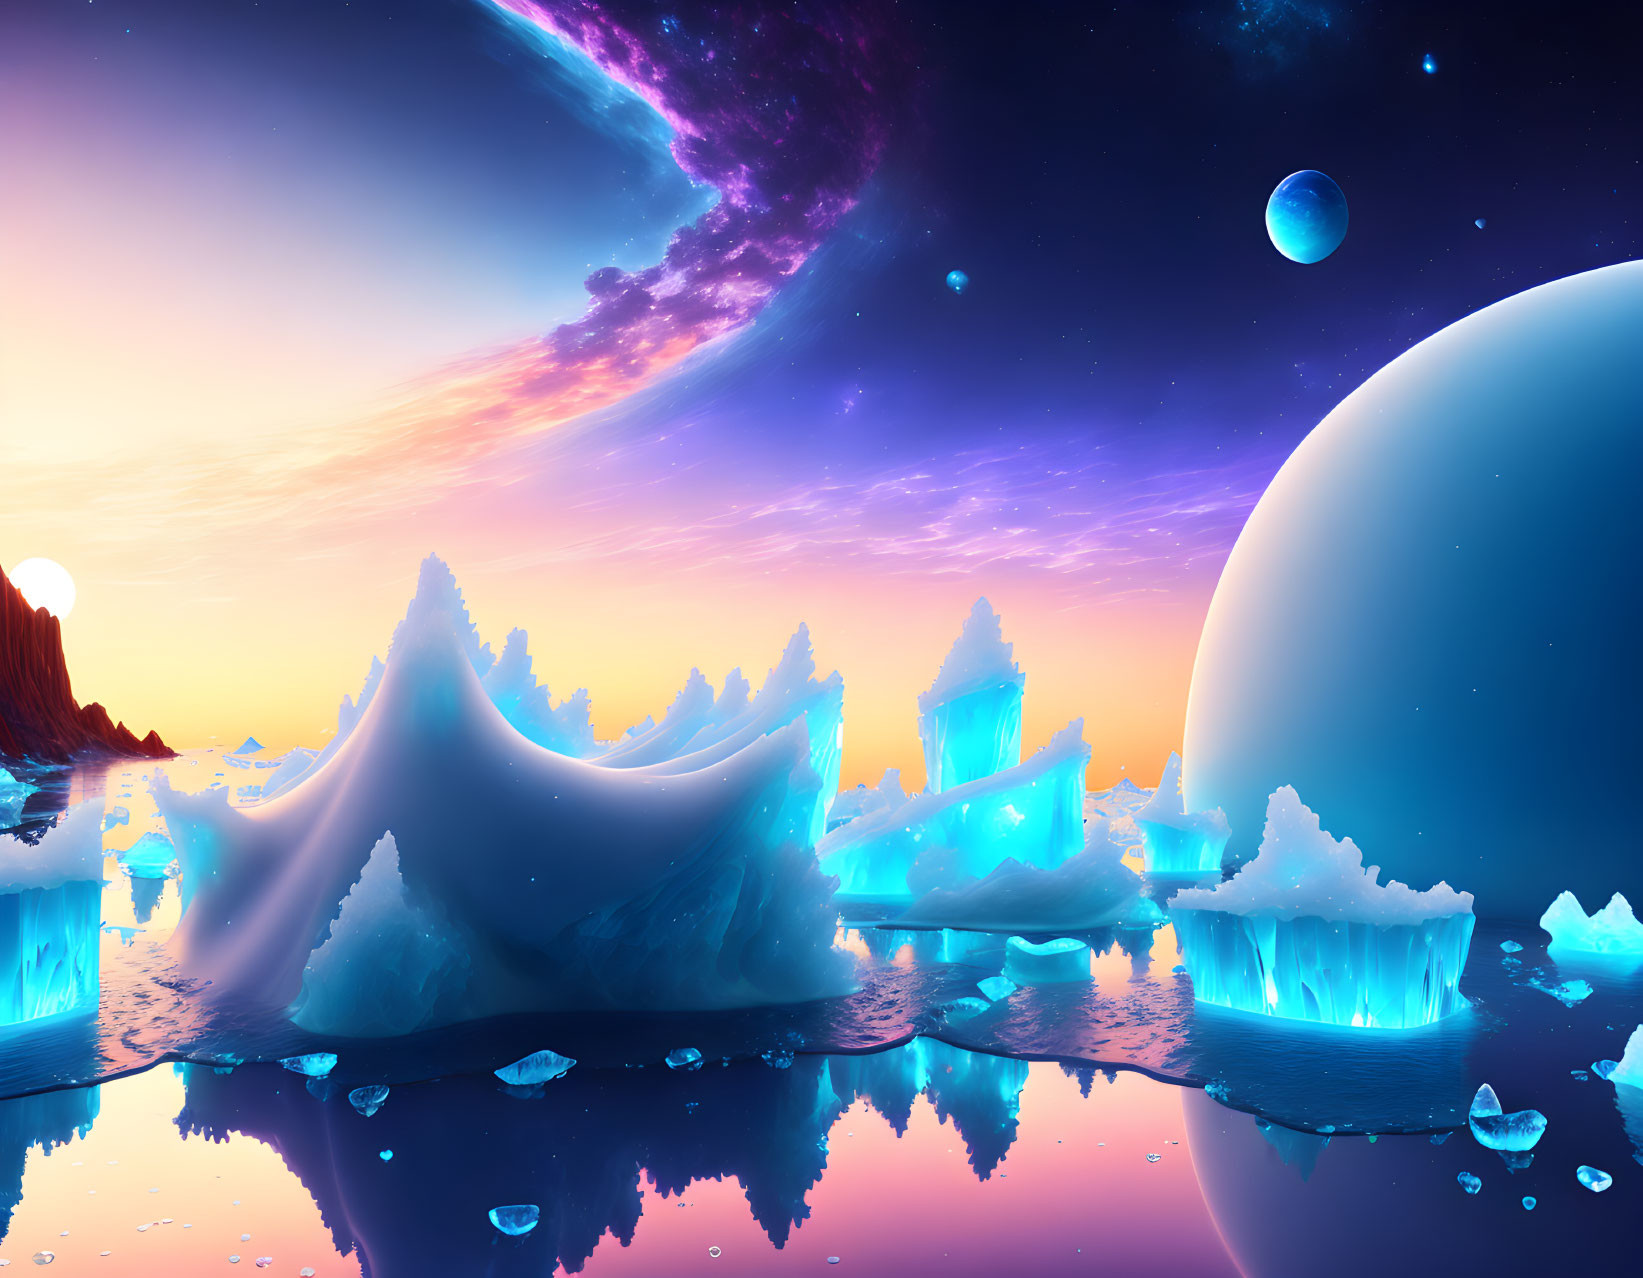 Flooded icy planet